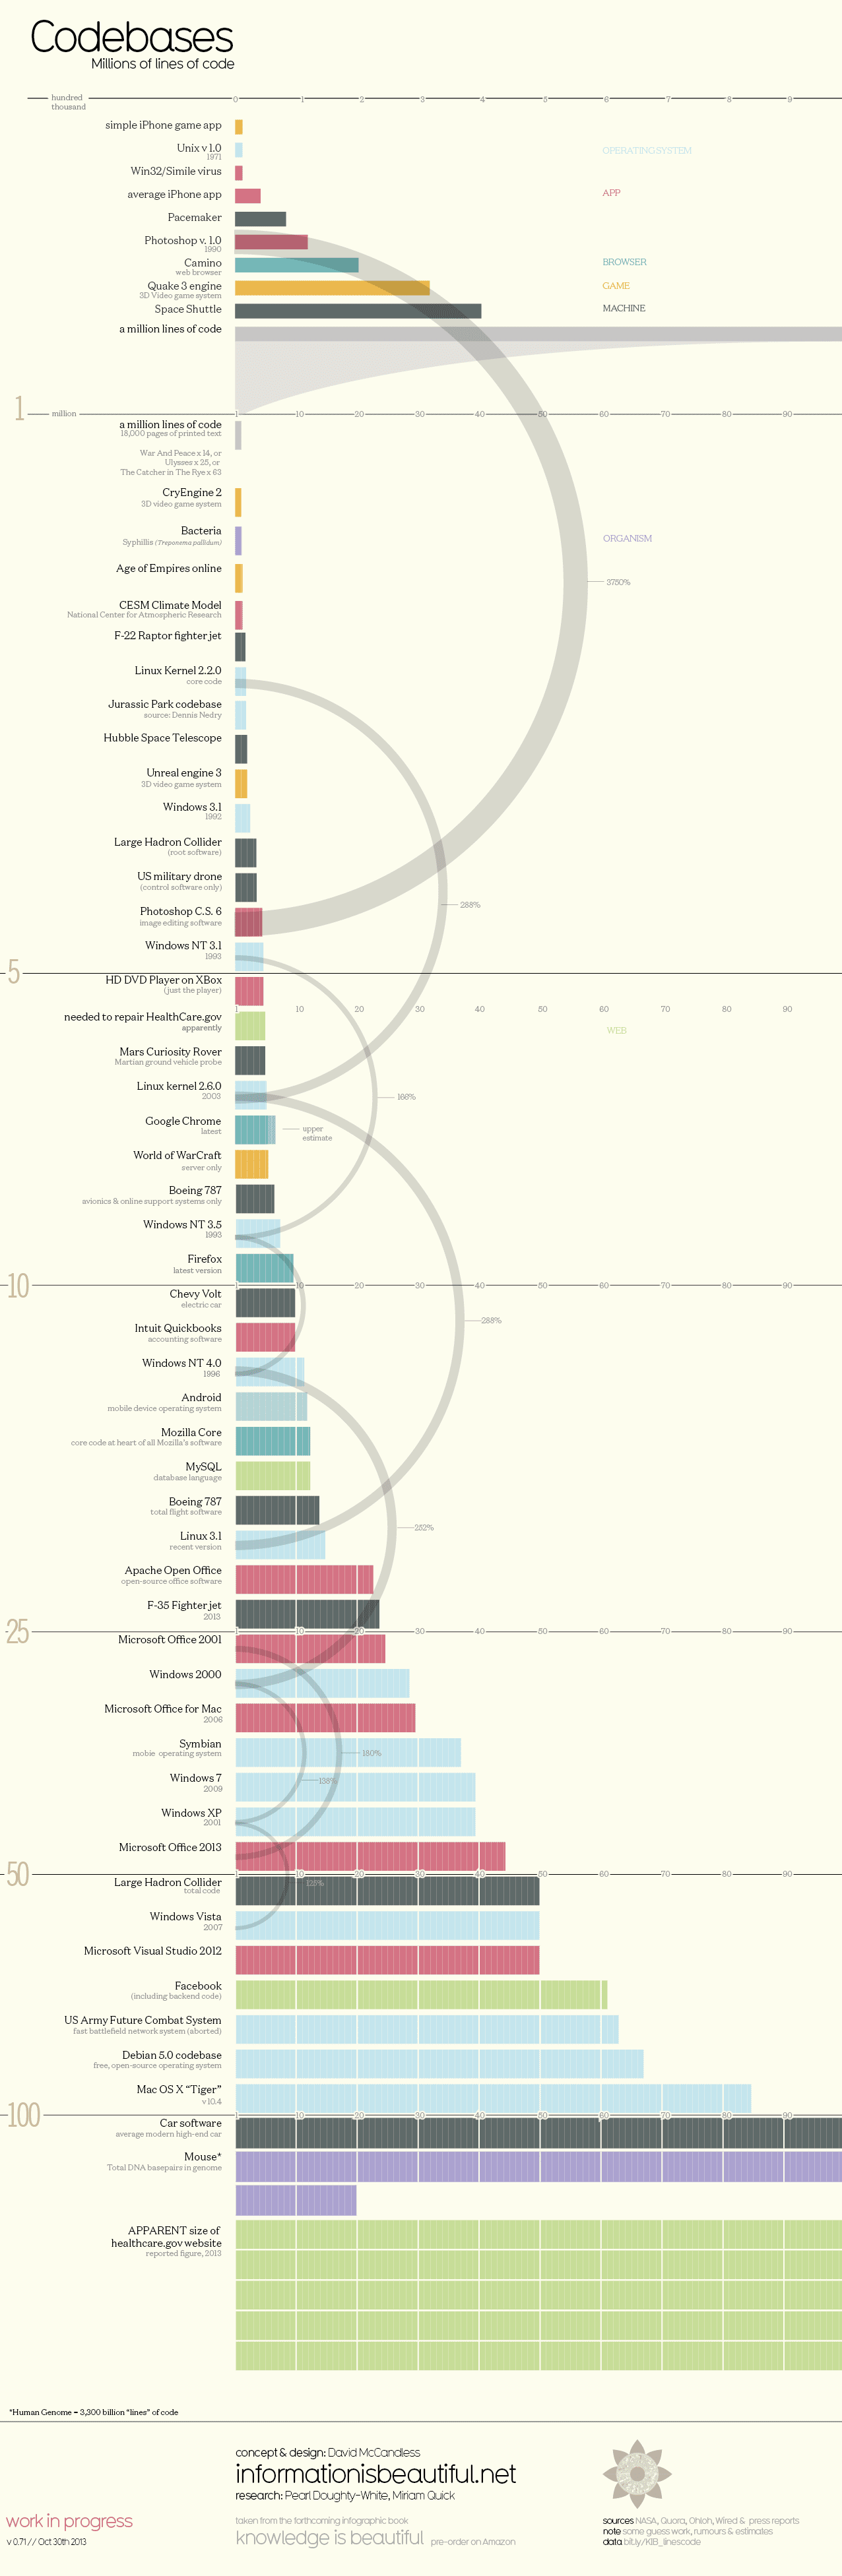 http://infobeautiful3.s3.amazonaws.com/2013/10/1276_lines_of_code5.png